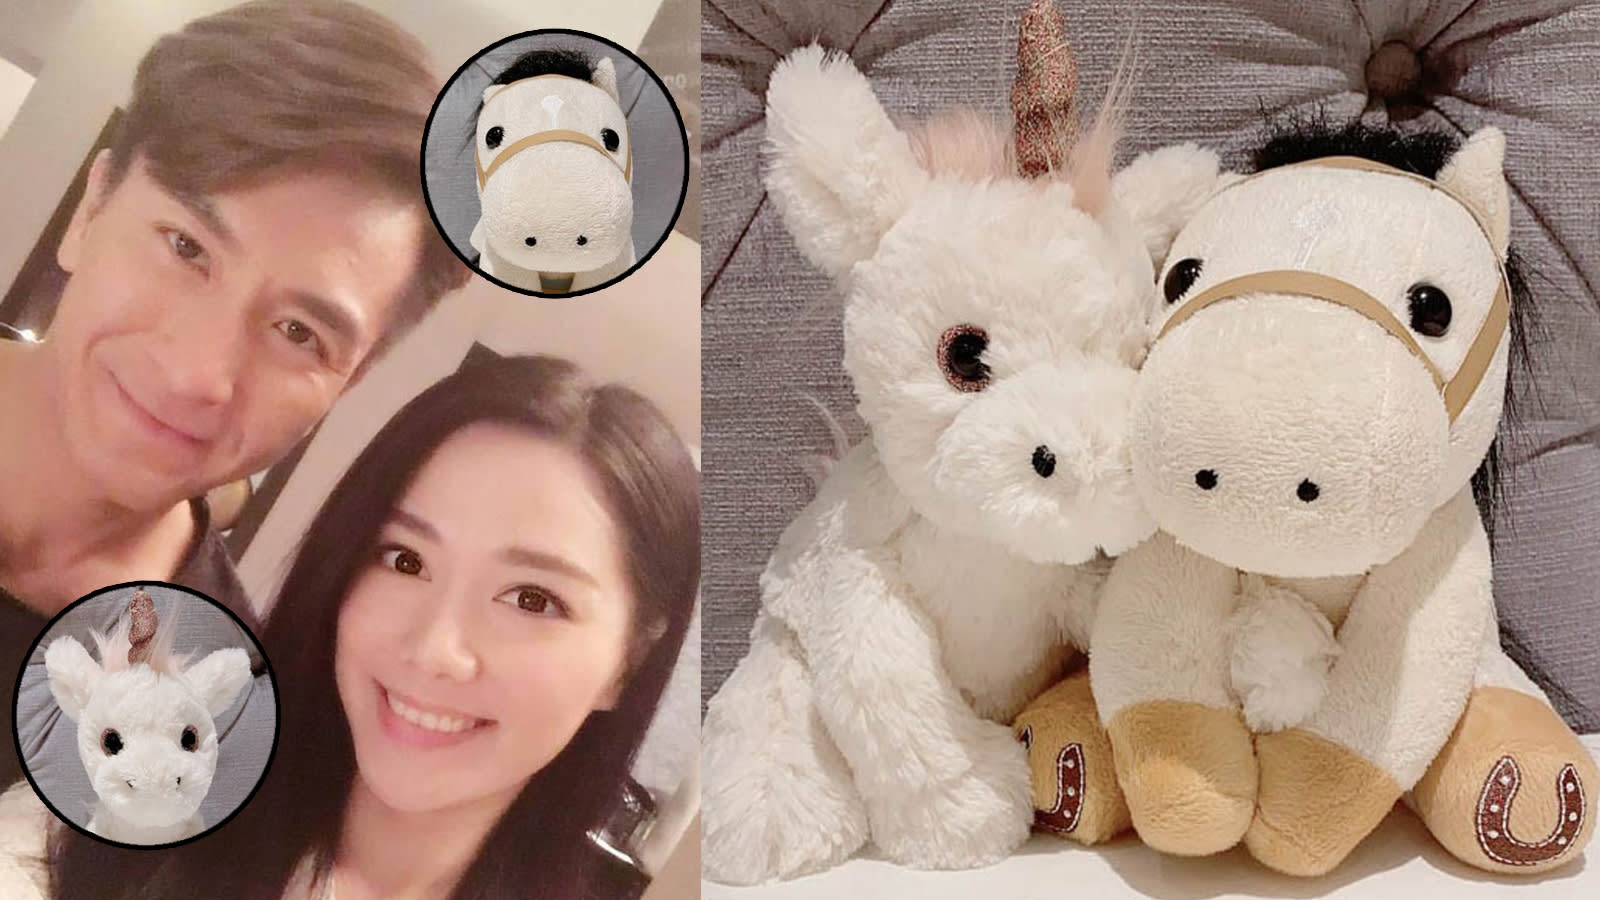 Kenneth Ma And Roxanne Tong Now Have Matching IG Profile Pics